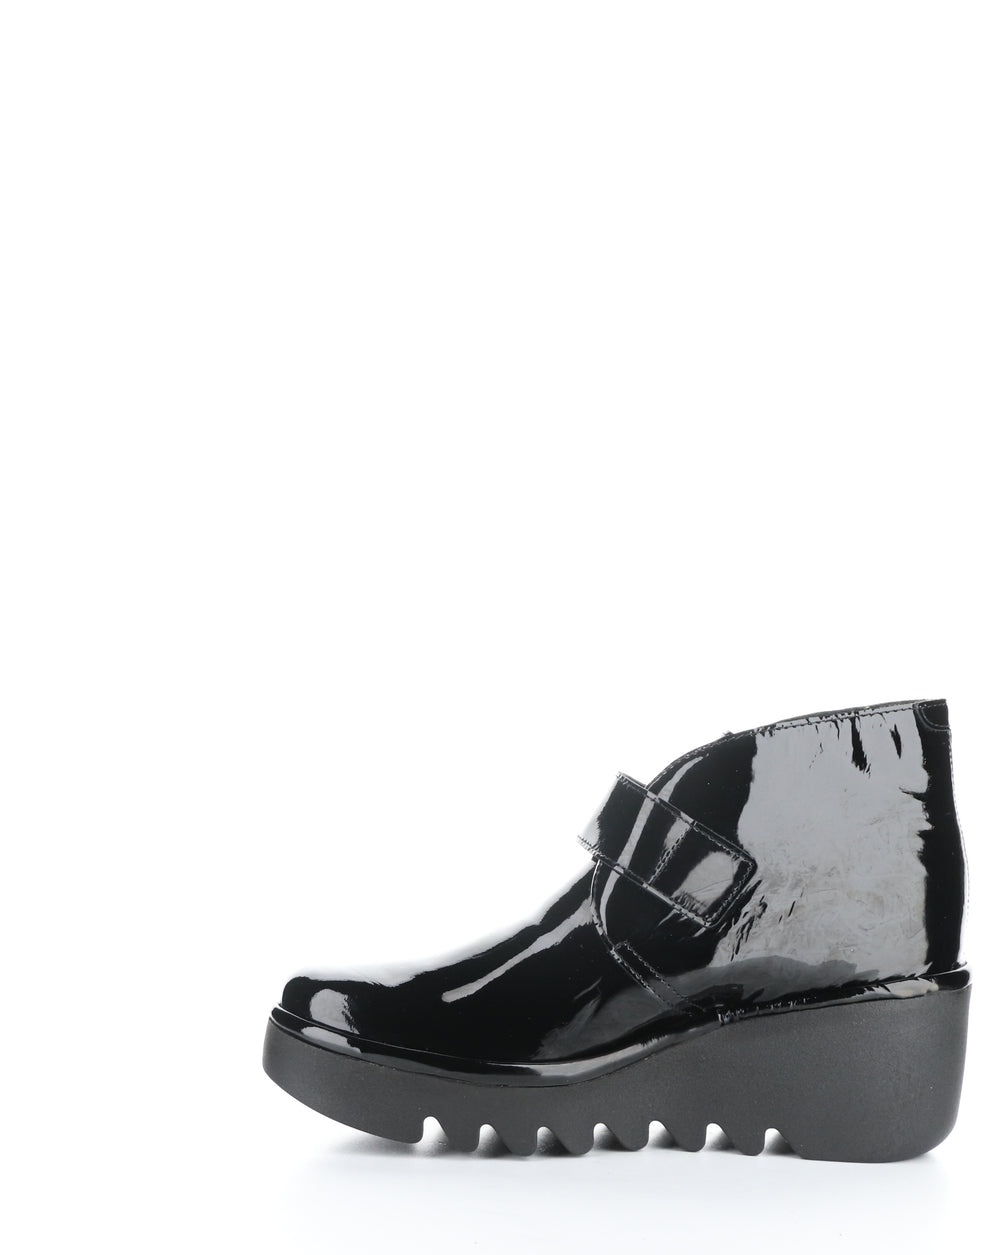 BIRT397FLY 007 BLACK Round Toe Boots